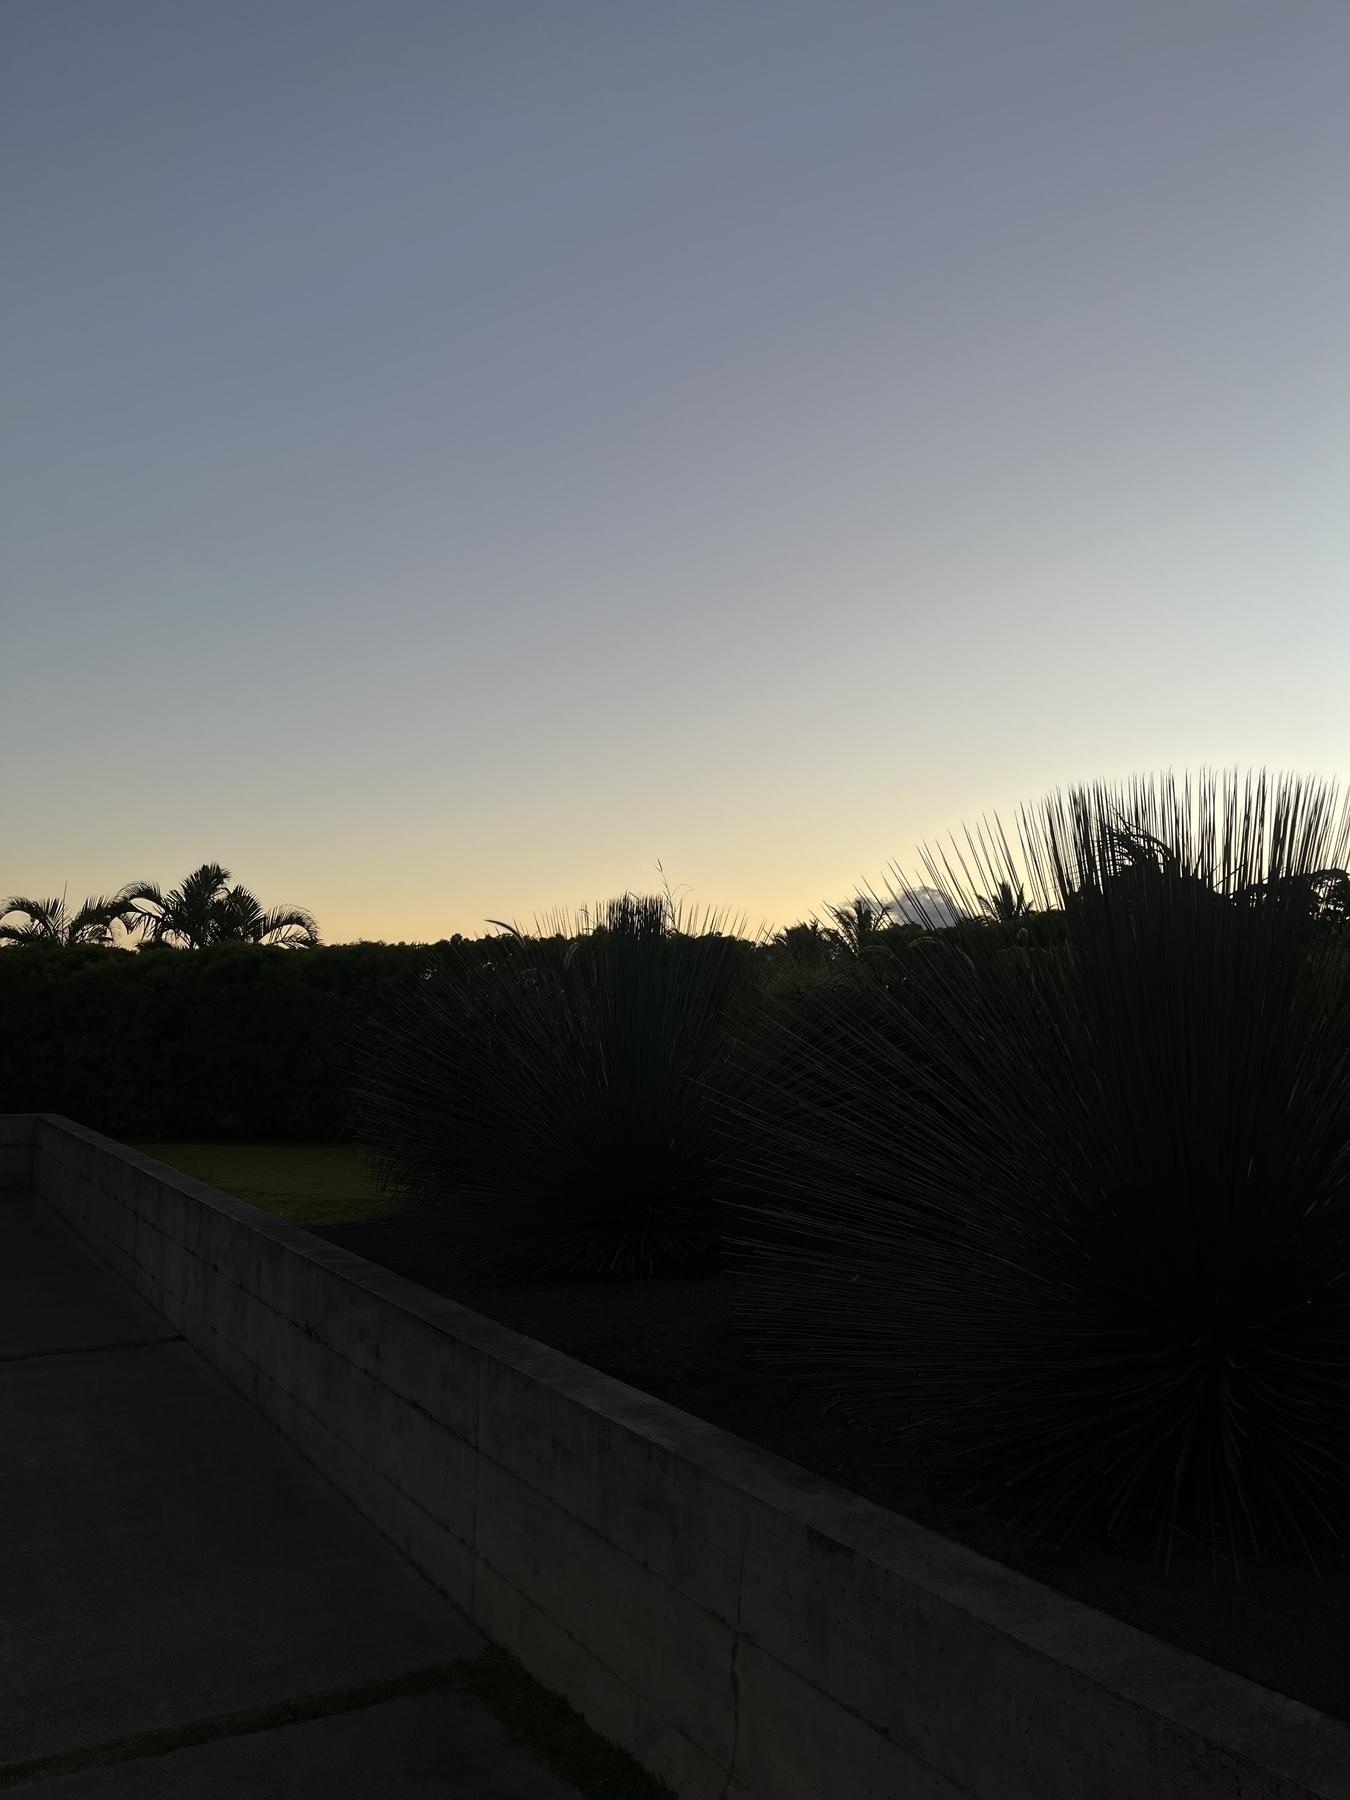 Dawn, a graduated sky going from yellows on the horizon to dark blues higher up. In the foreground is a silhouette of a bush, and silhouettes of tropical trees and other shrubs appearing over the bush